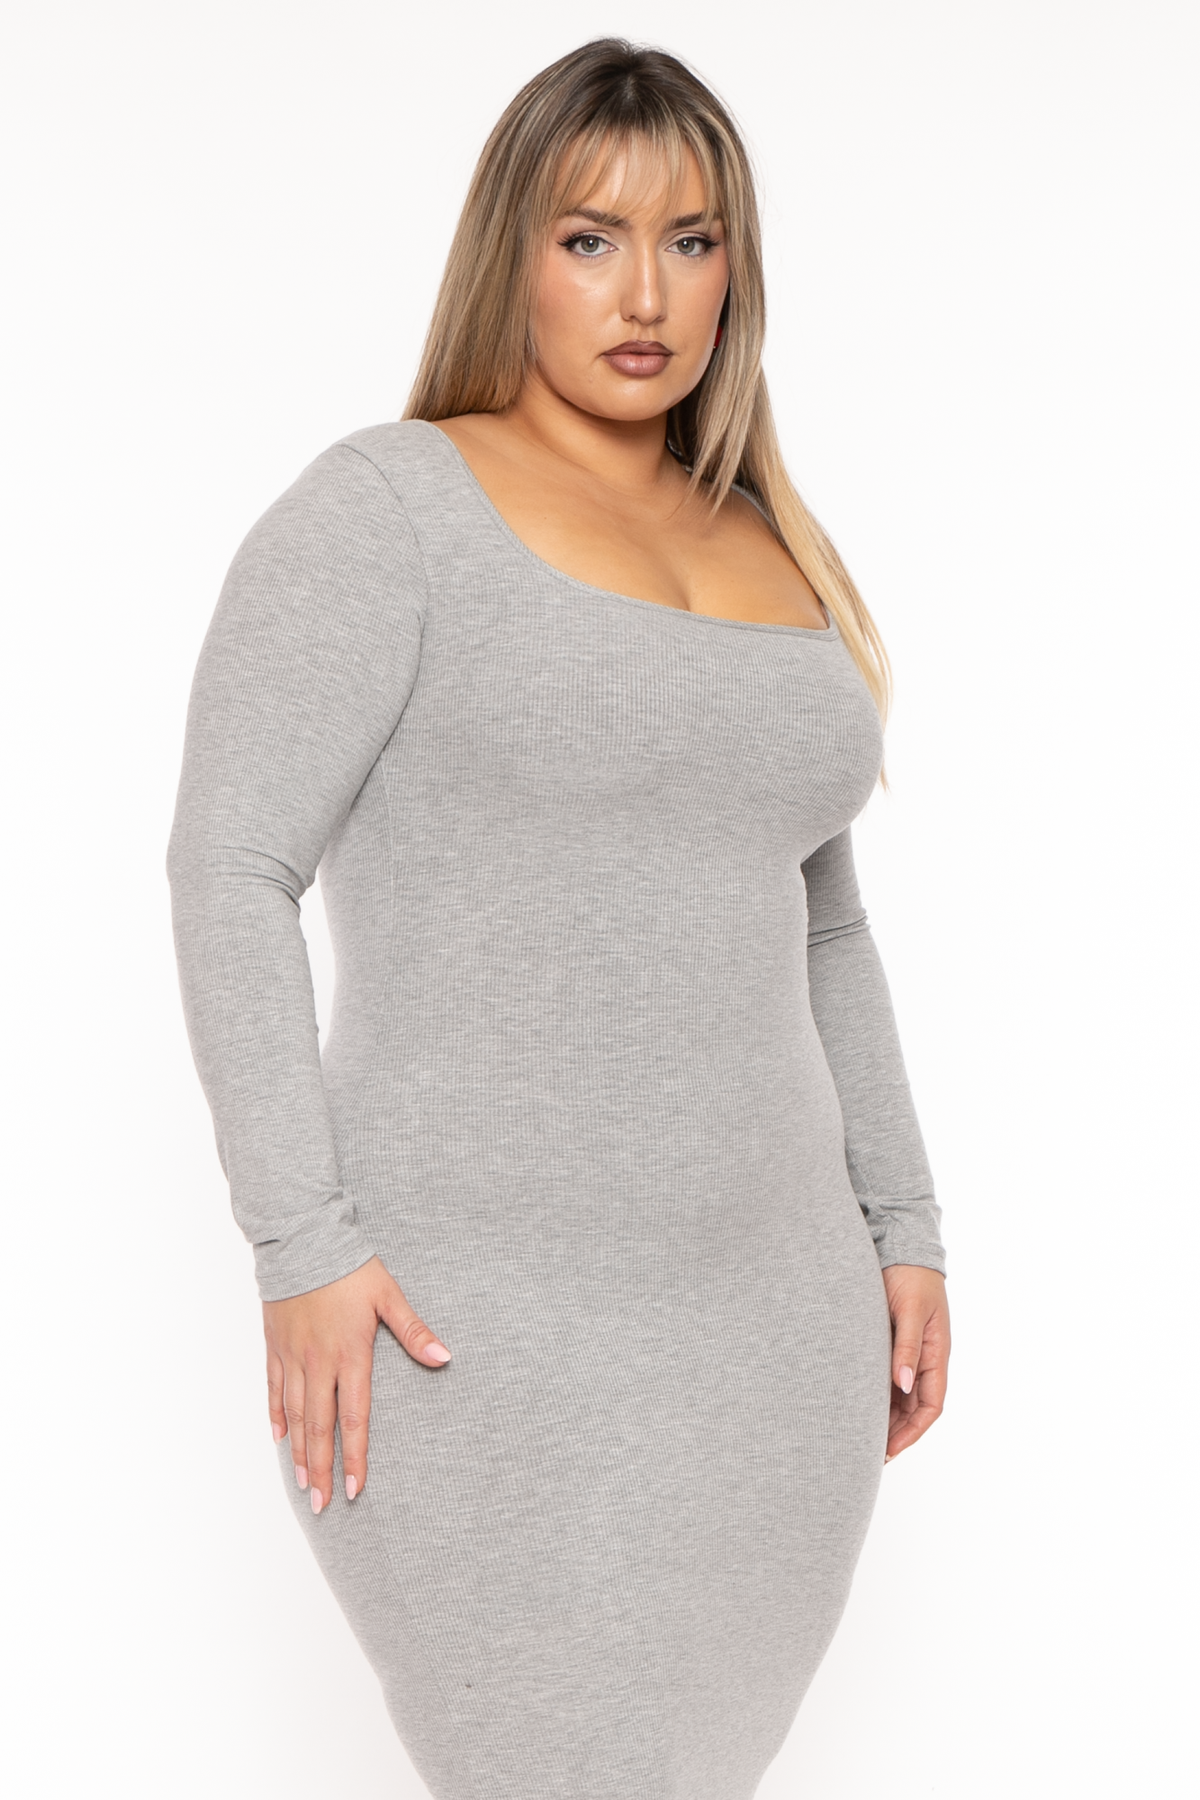 Silver Grey Sleeveless Dressy Evening Sexy Curvy Top Plus Size – Pineapple  Clothing Staging